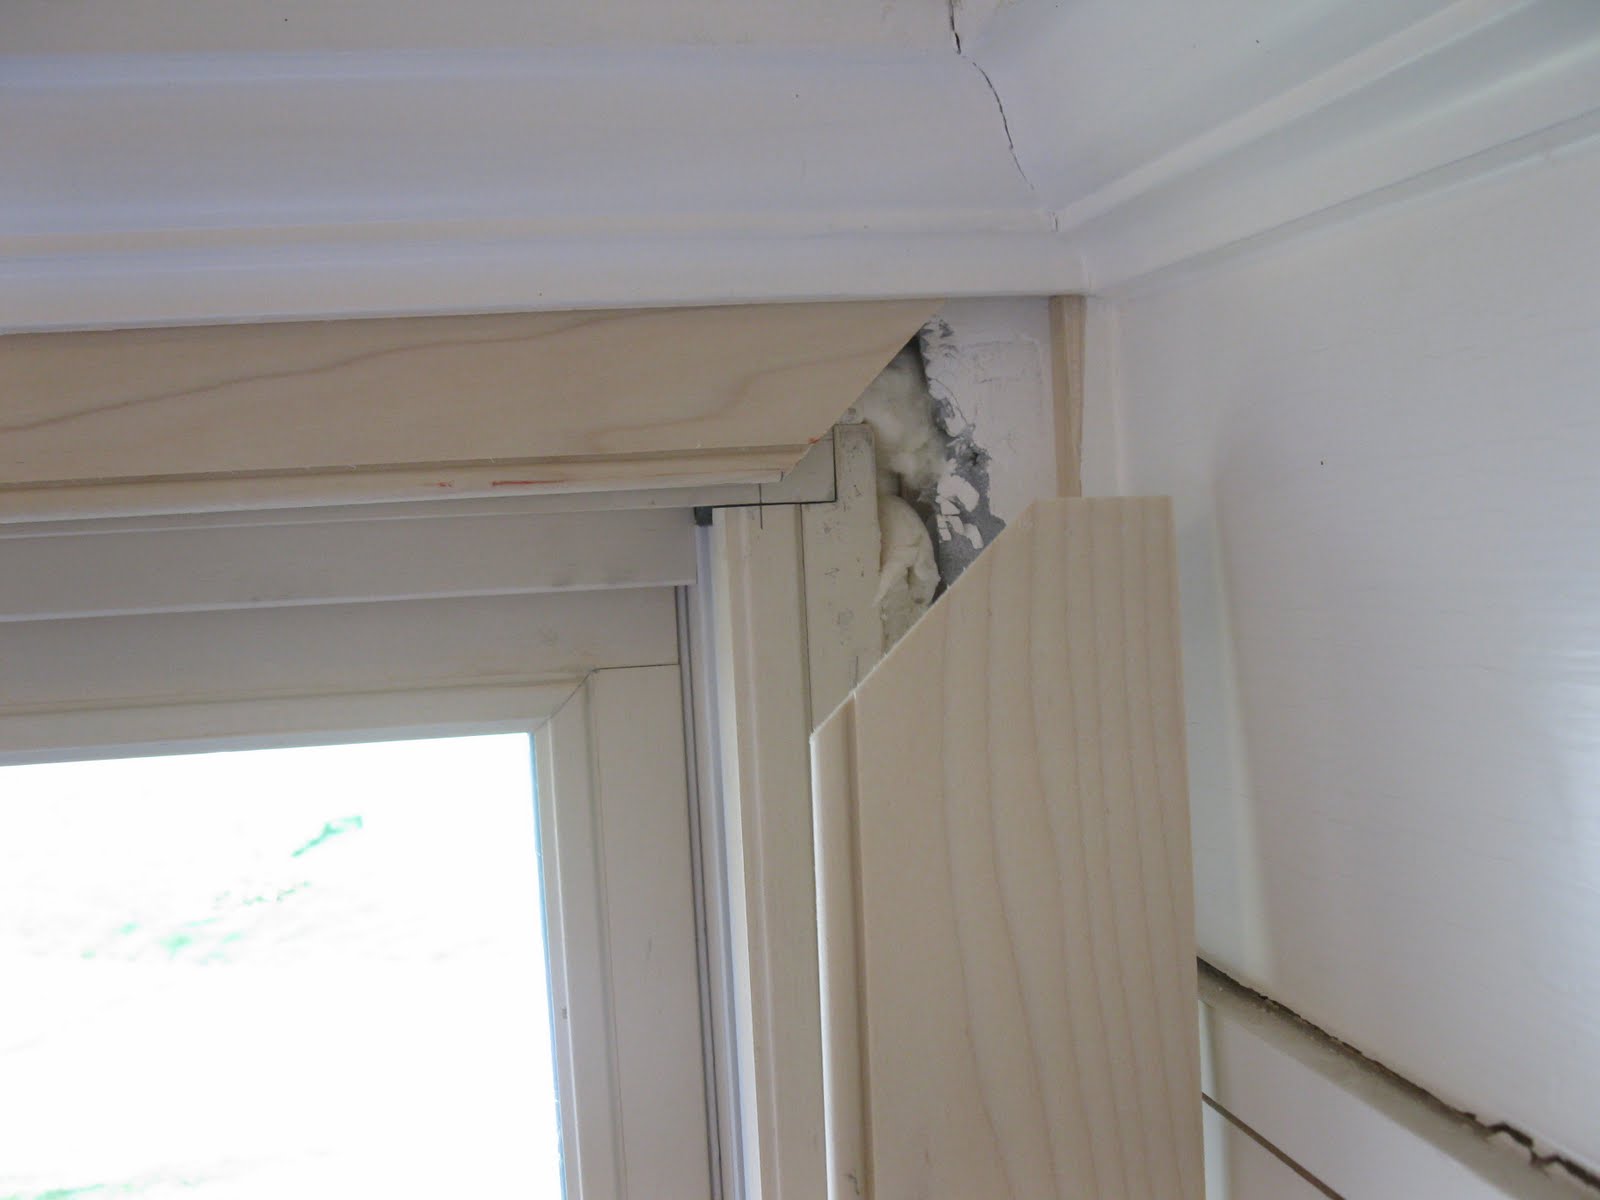 Applying Trim In Confined Spaces - Concord Carpenter A Carpenter Cut The Top Section Of A Window Frame